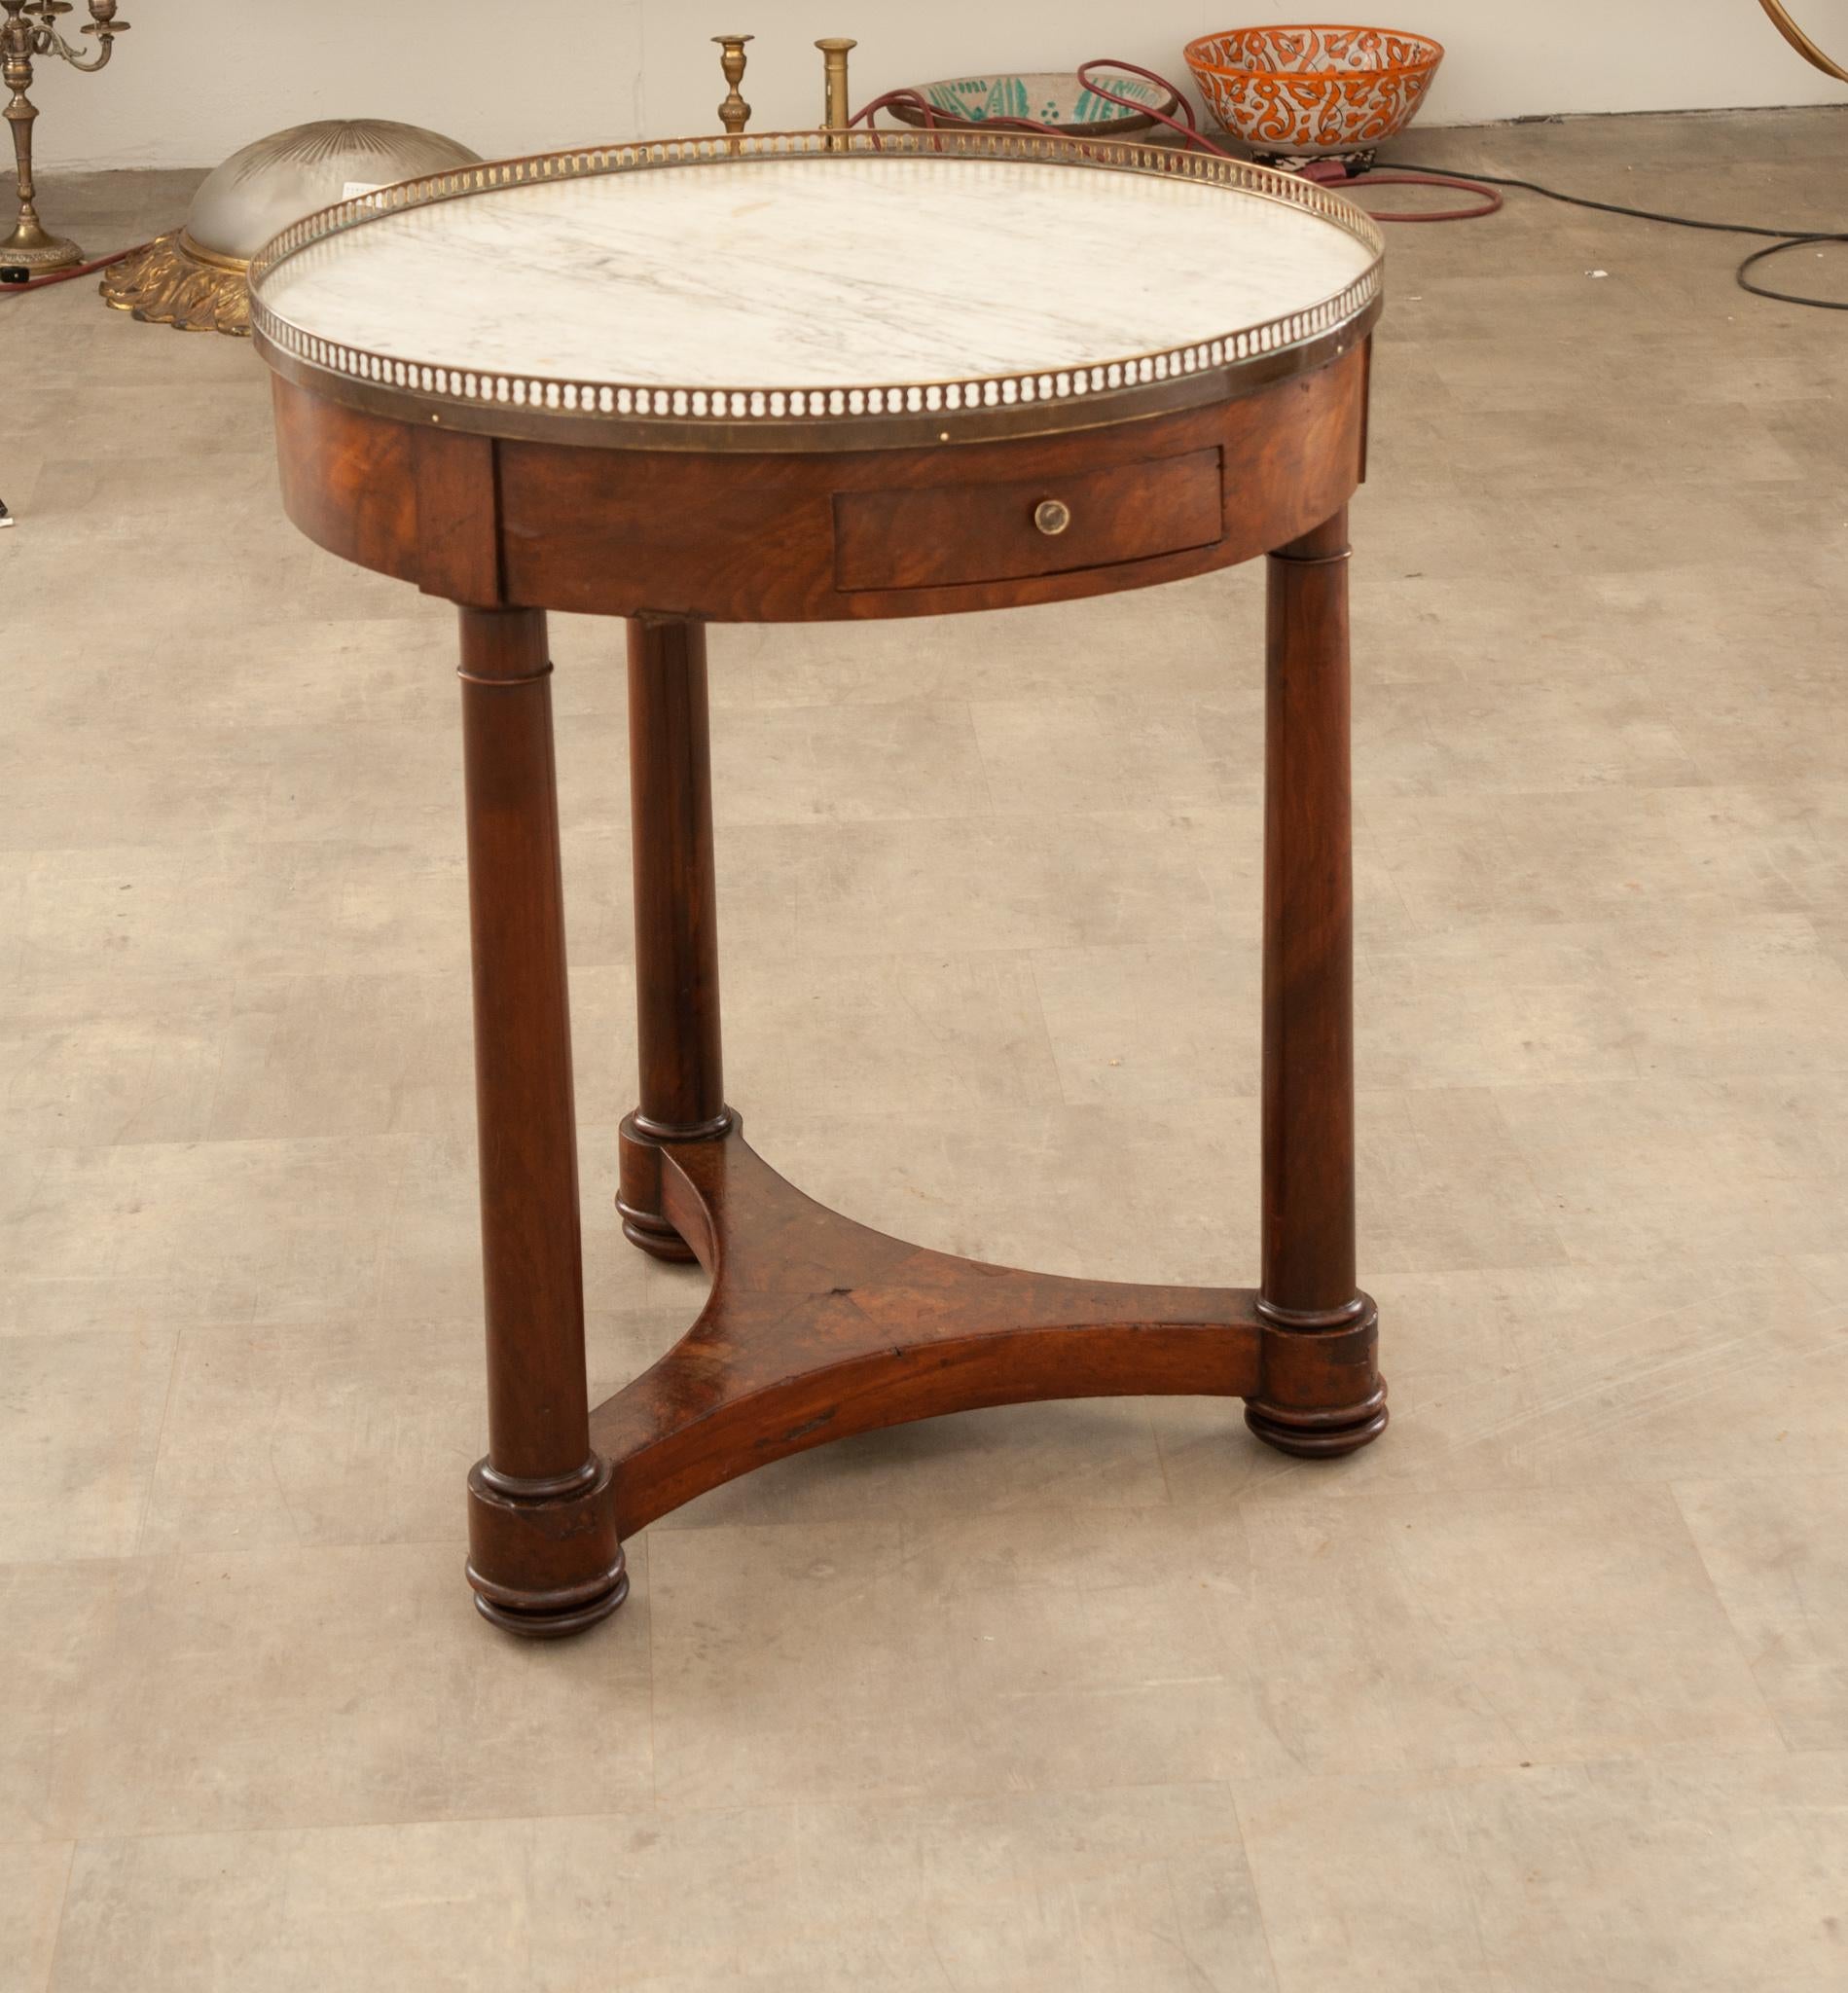 A pierced brass gallery surrounds the round, white marble top on this terrific 19th Century French Empire style gueridon. The top is lifted by three column-form legs that are joined by a concave stretcher below. The apron houses a single drawer